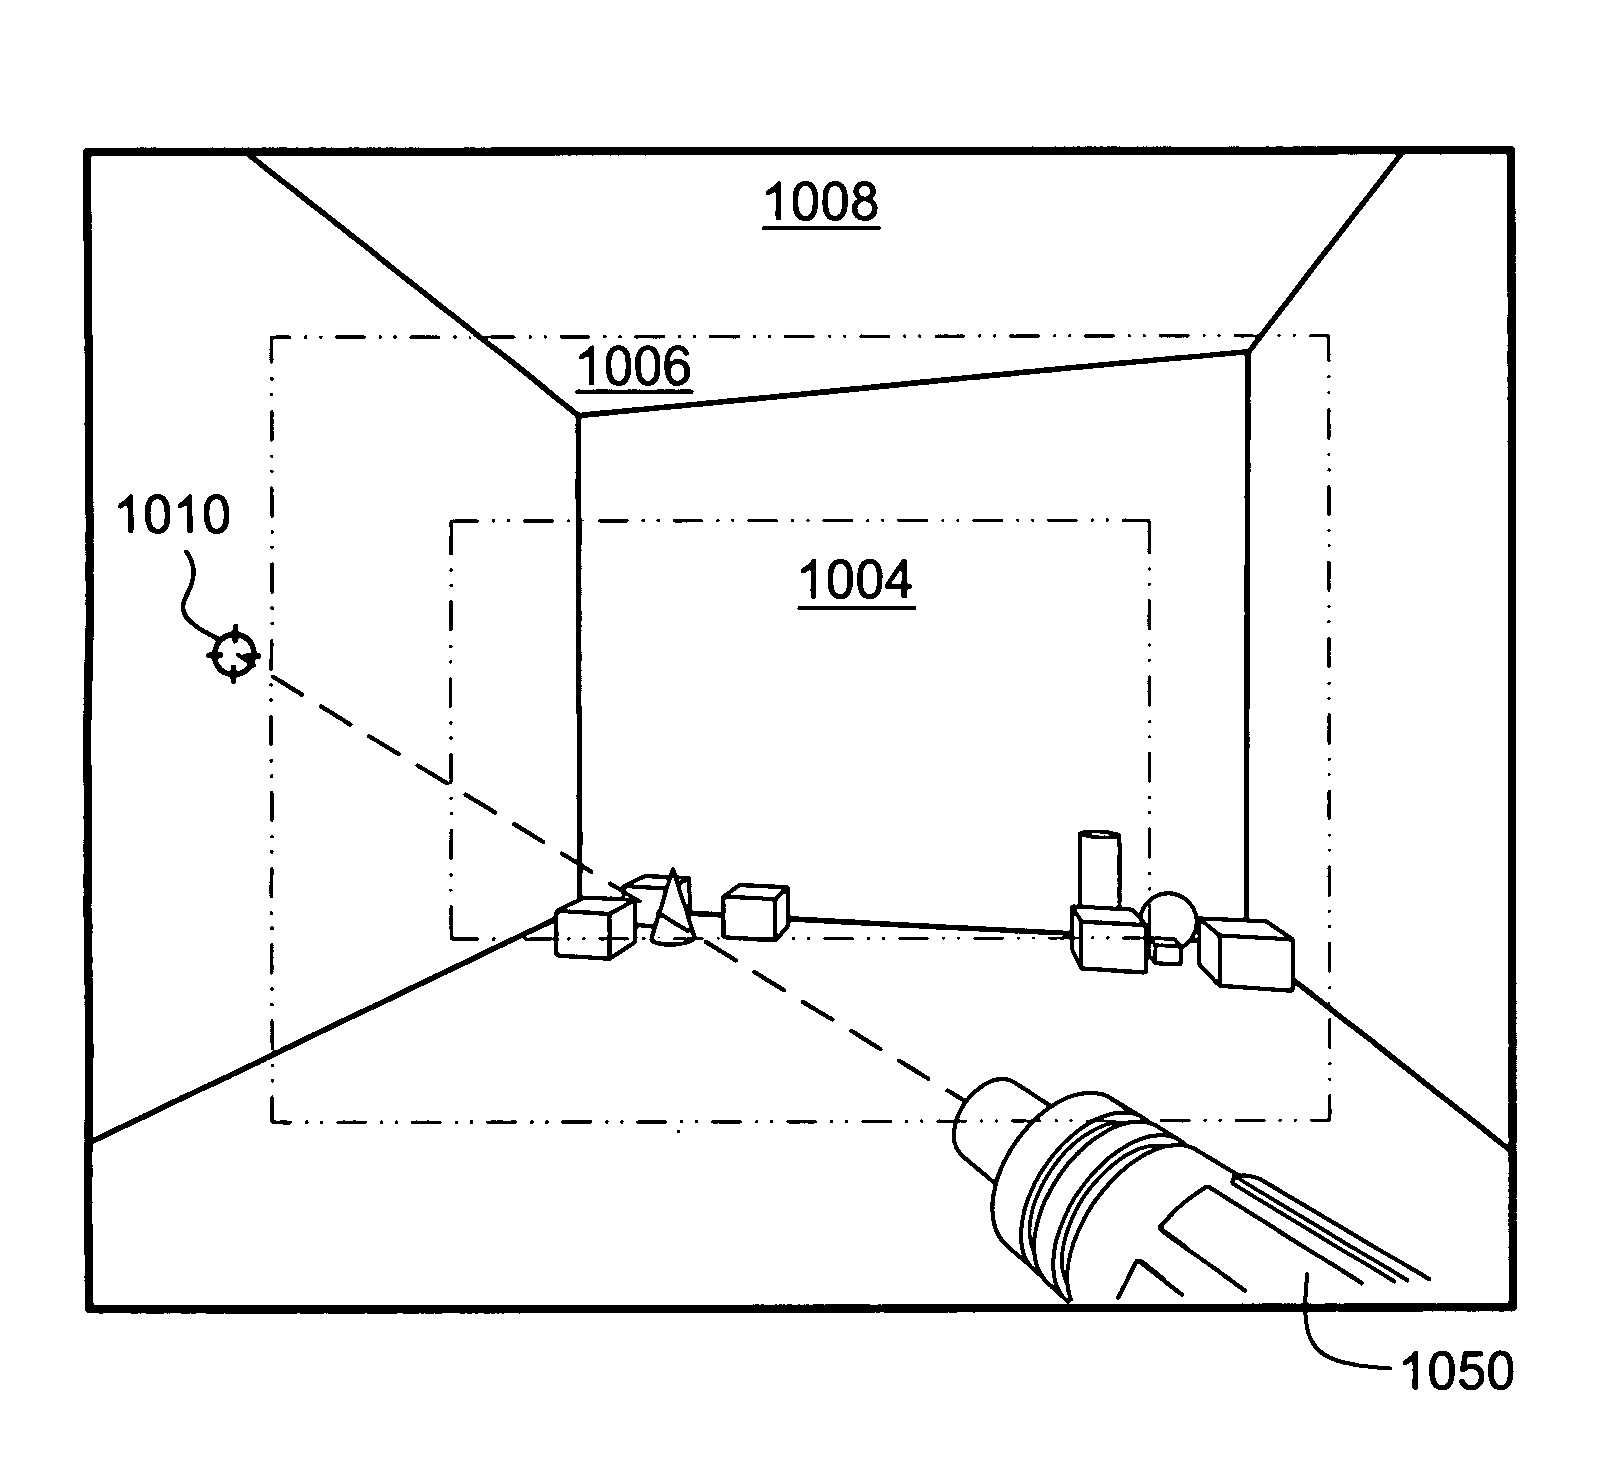 Method and apparatus for using a common pointing input to control 3D viewpoint and object targeting